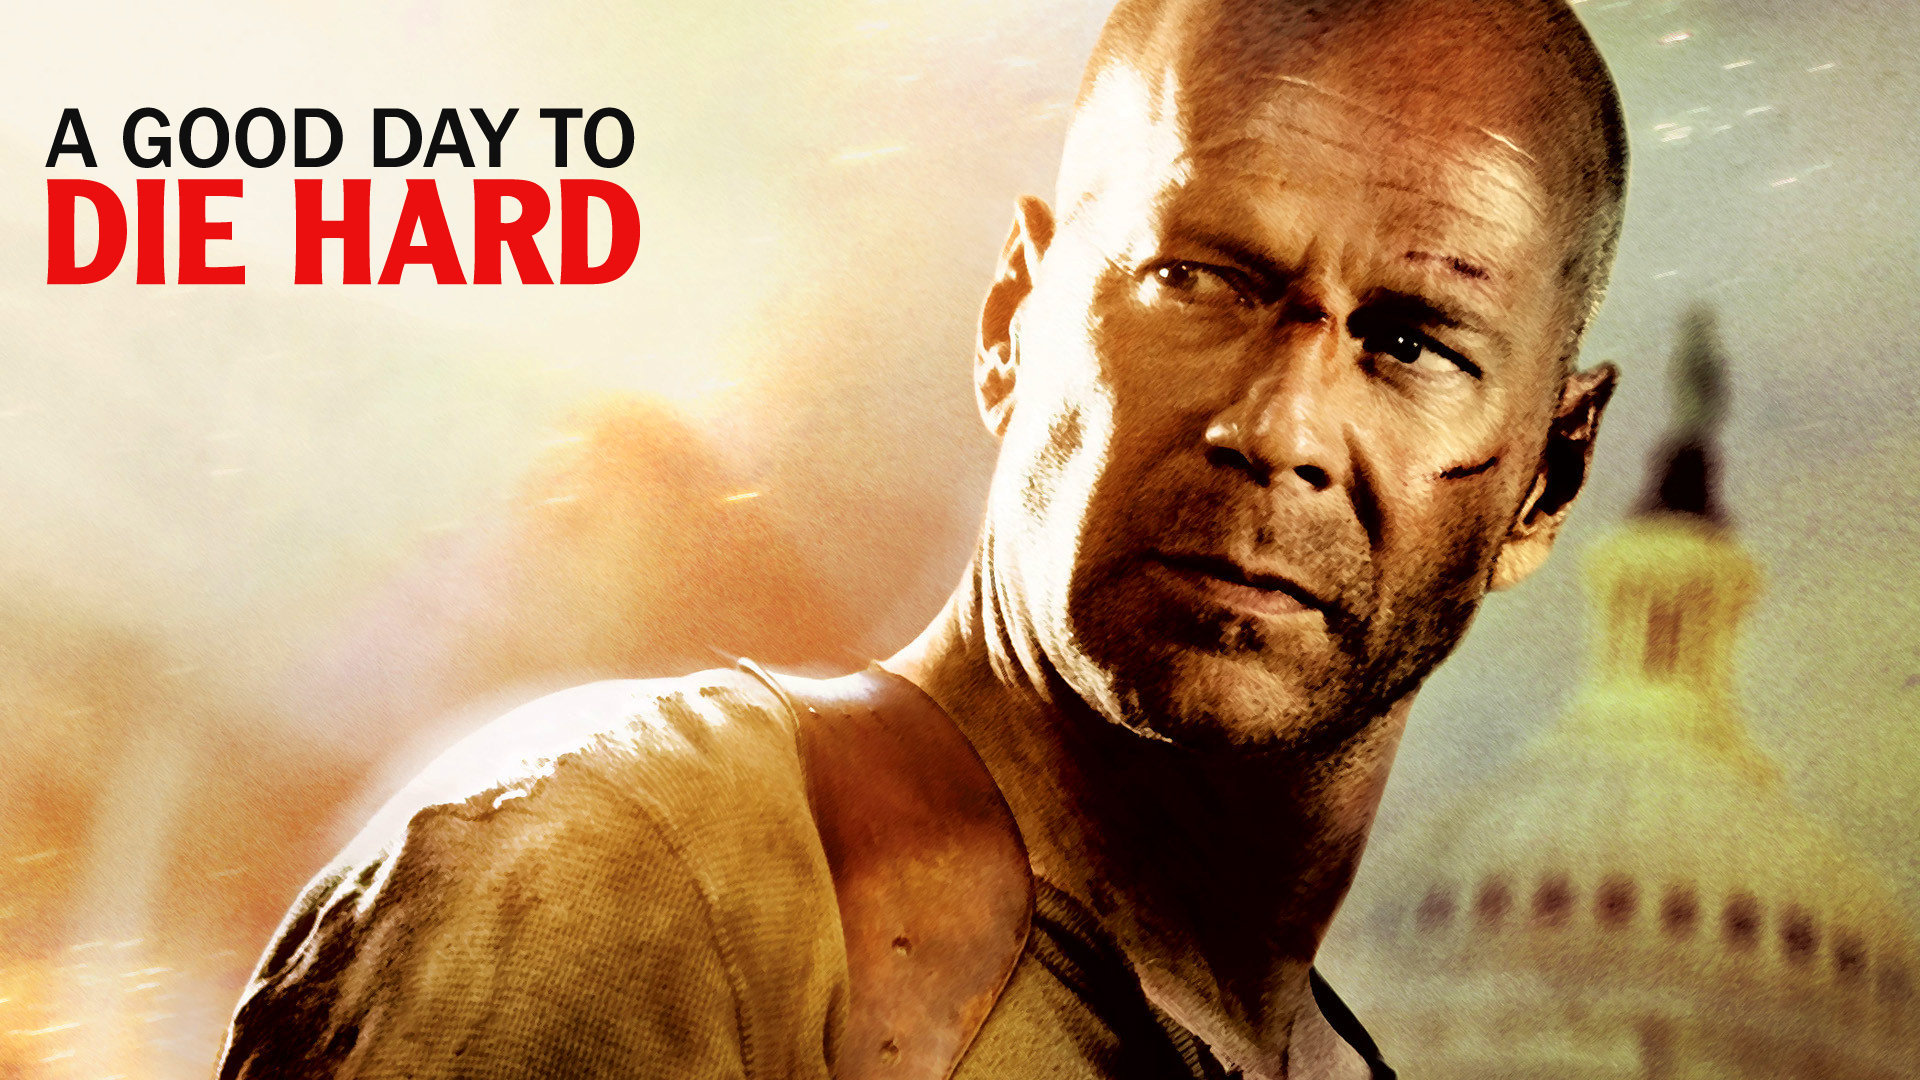 A Good Day To Die Hard #1